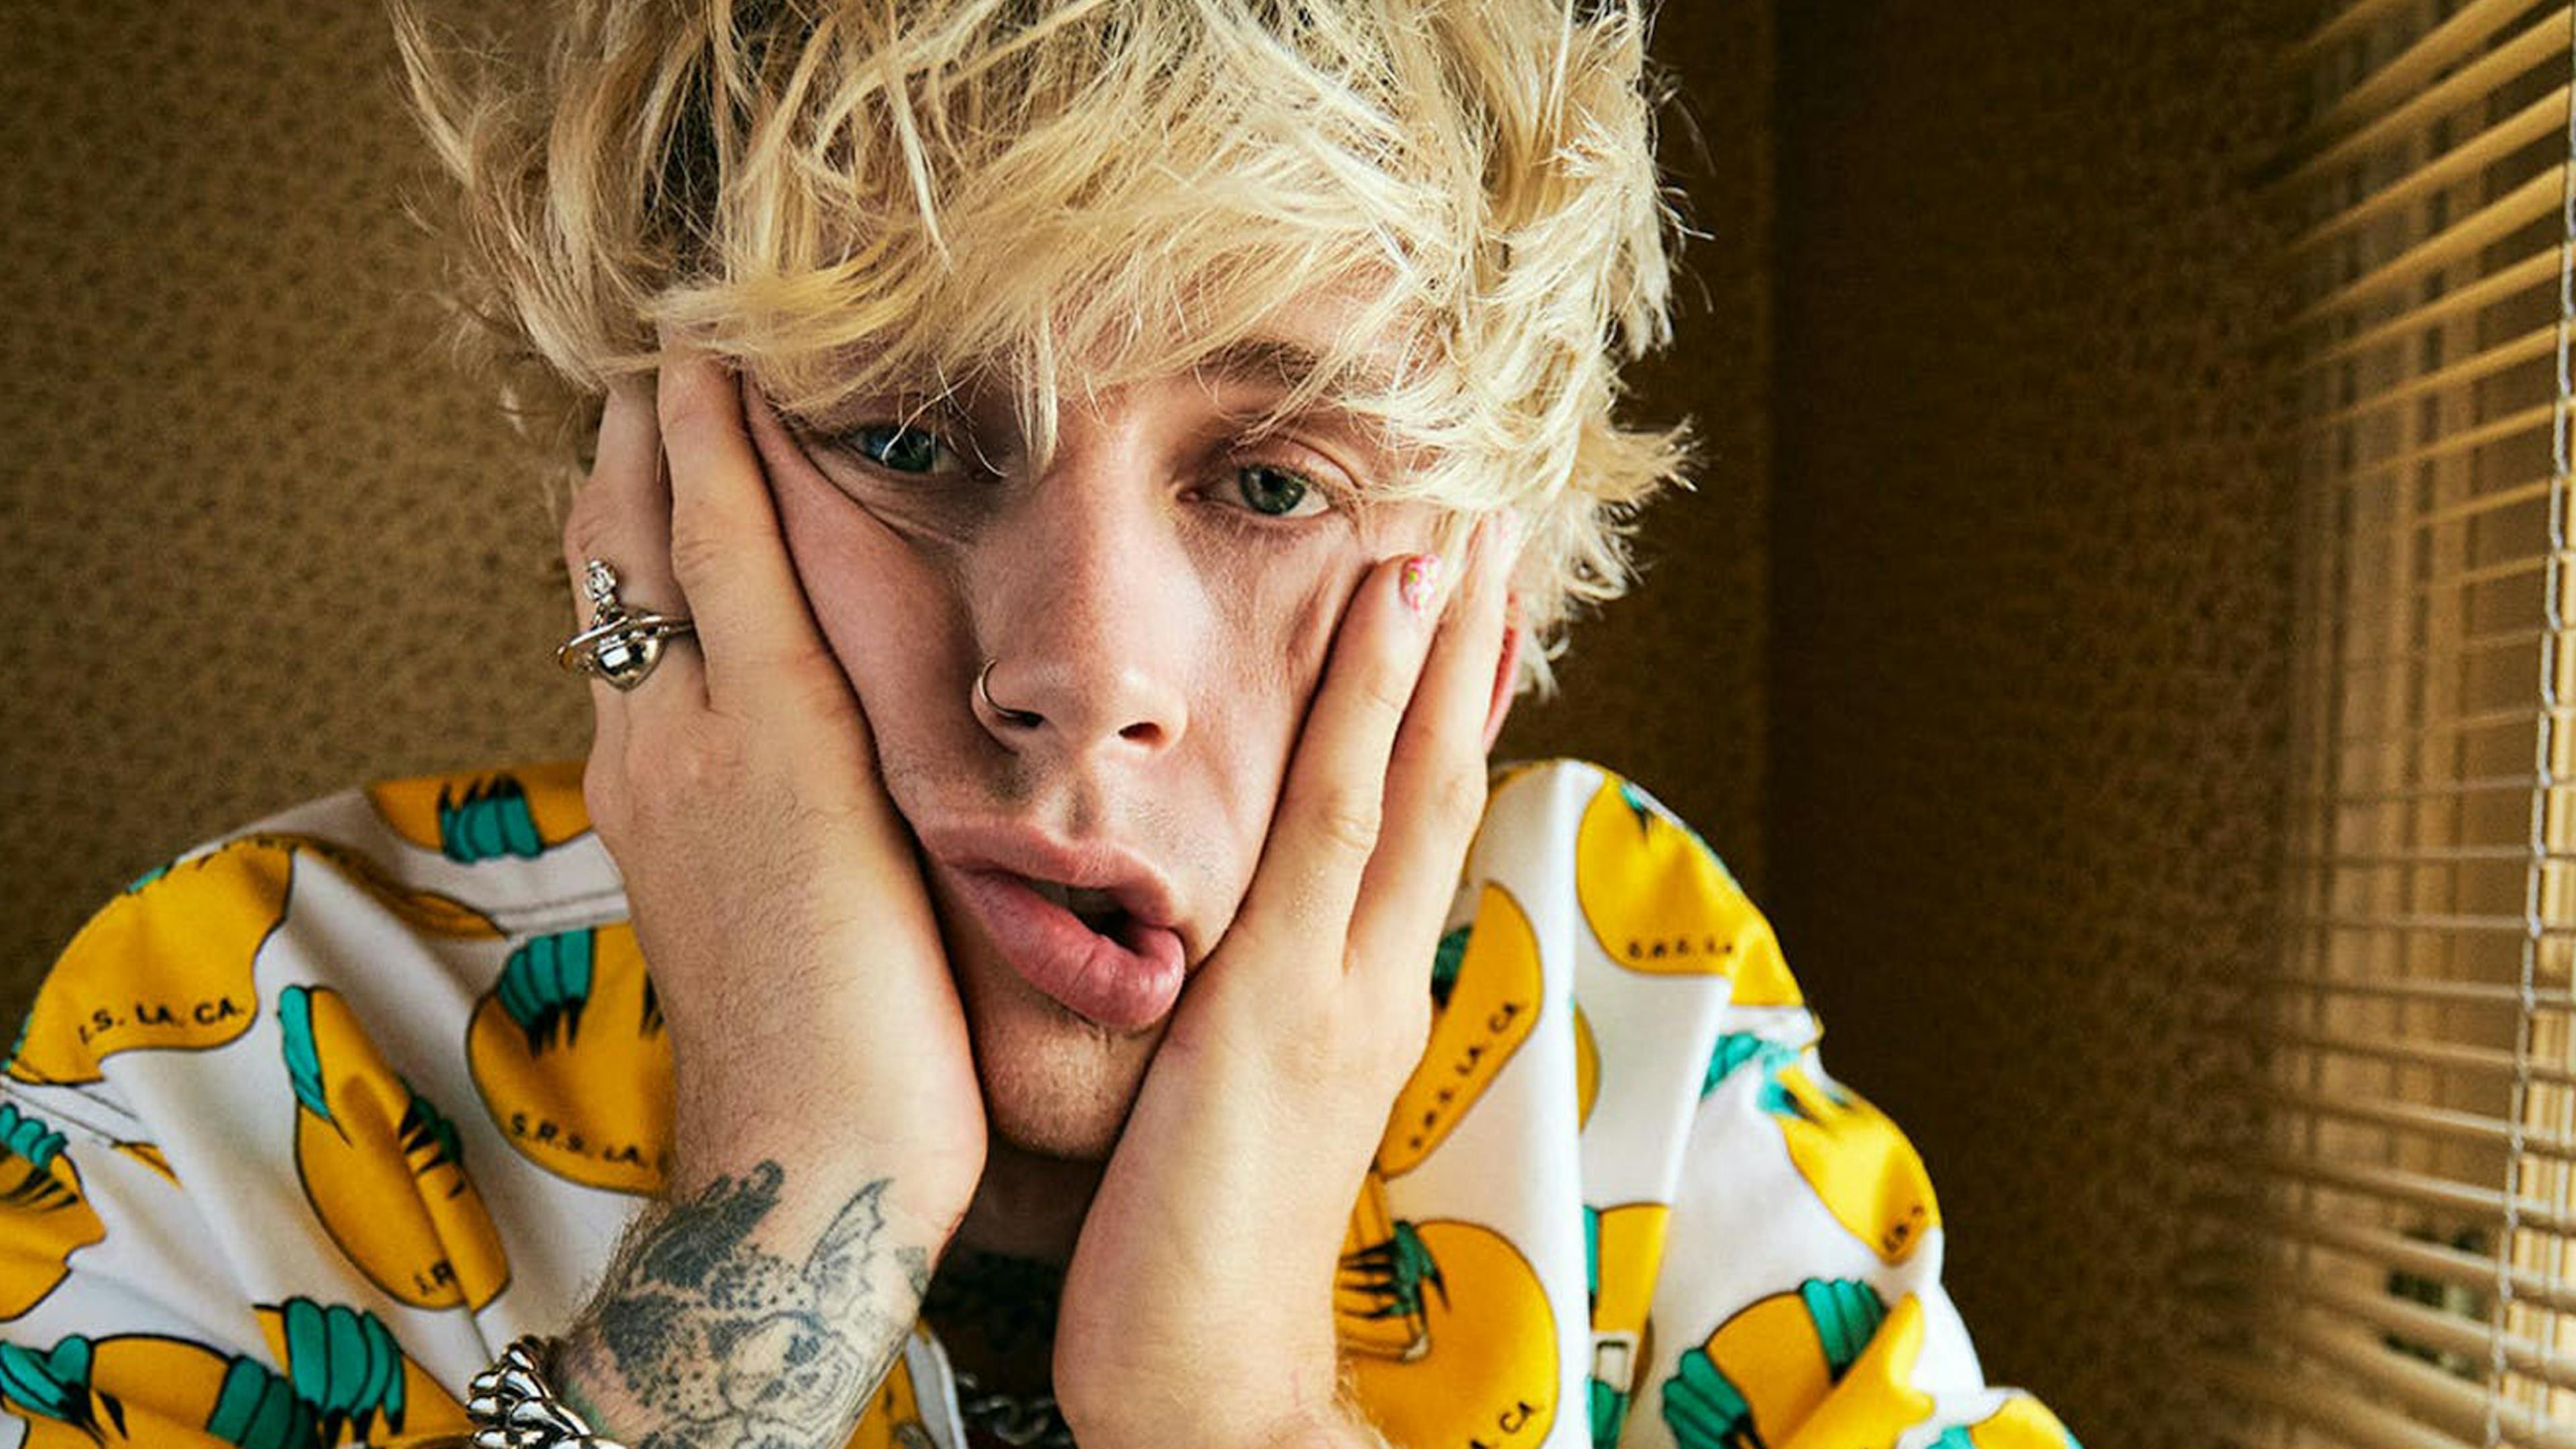 Machine Gun Kelly on his extraterrestrial encounters: "They're out here"